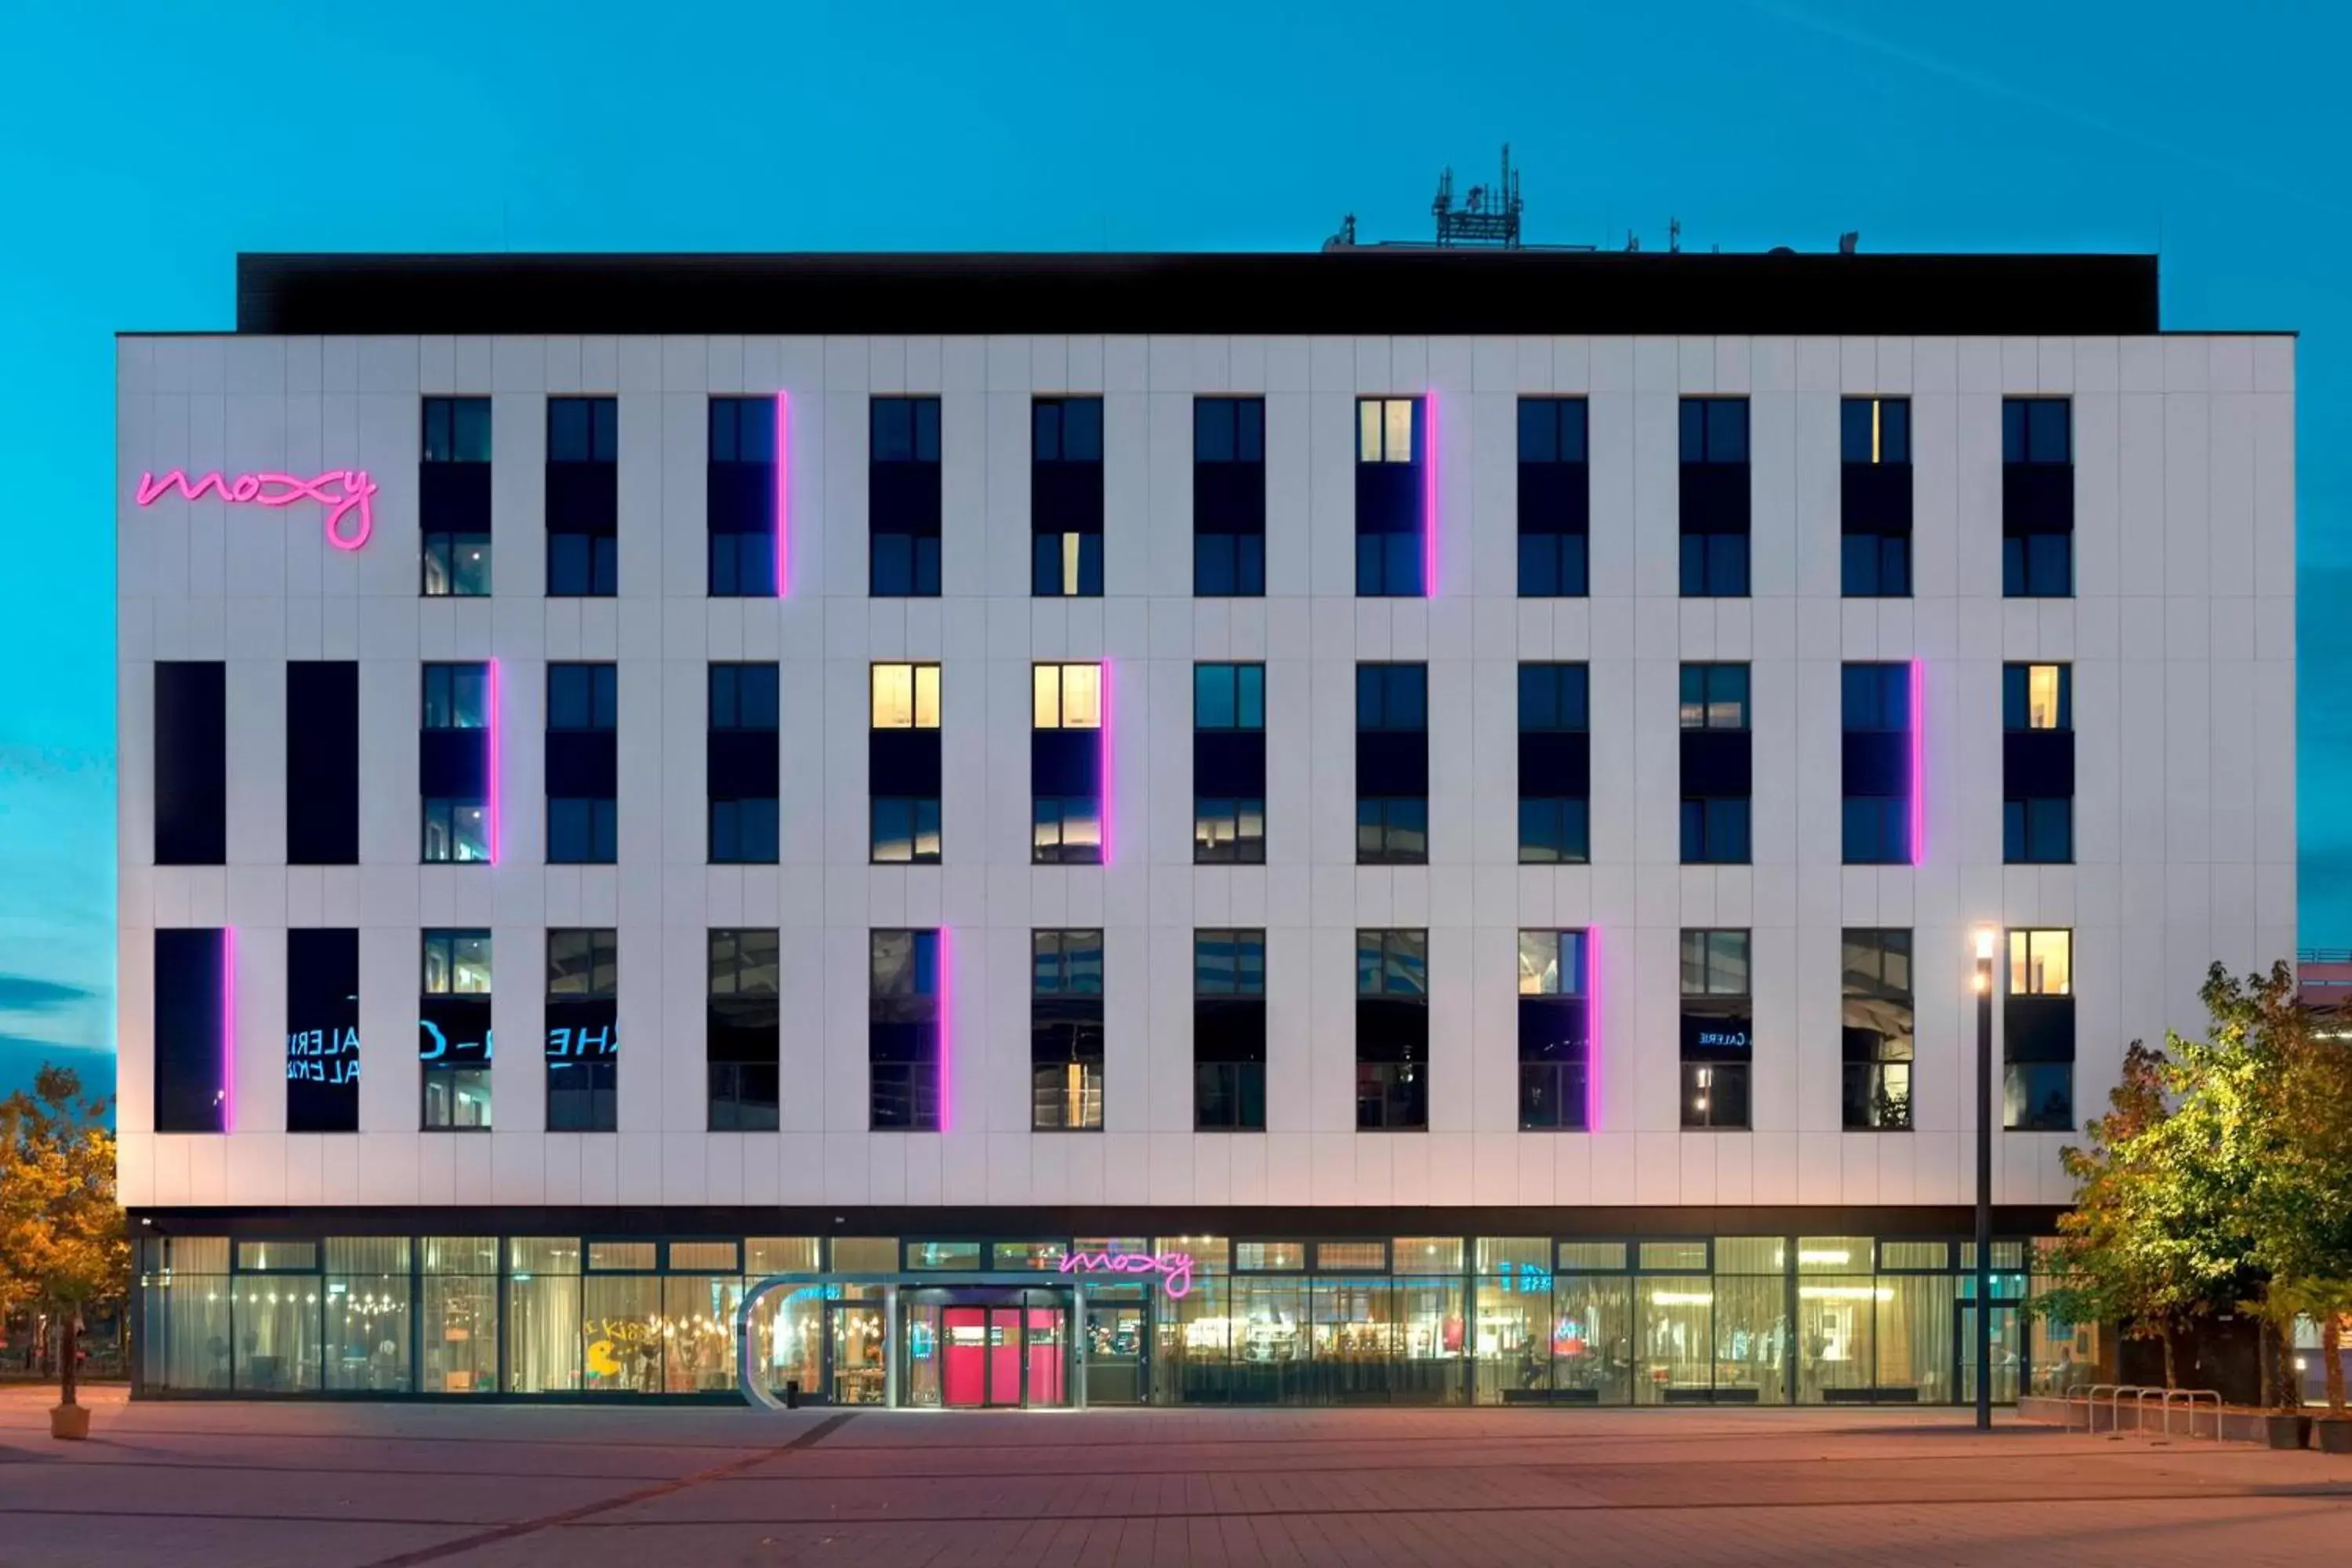 Property Building in Moxy Ludwigshafen